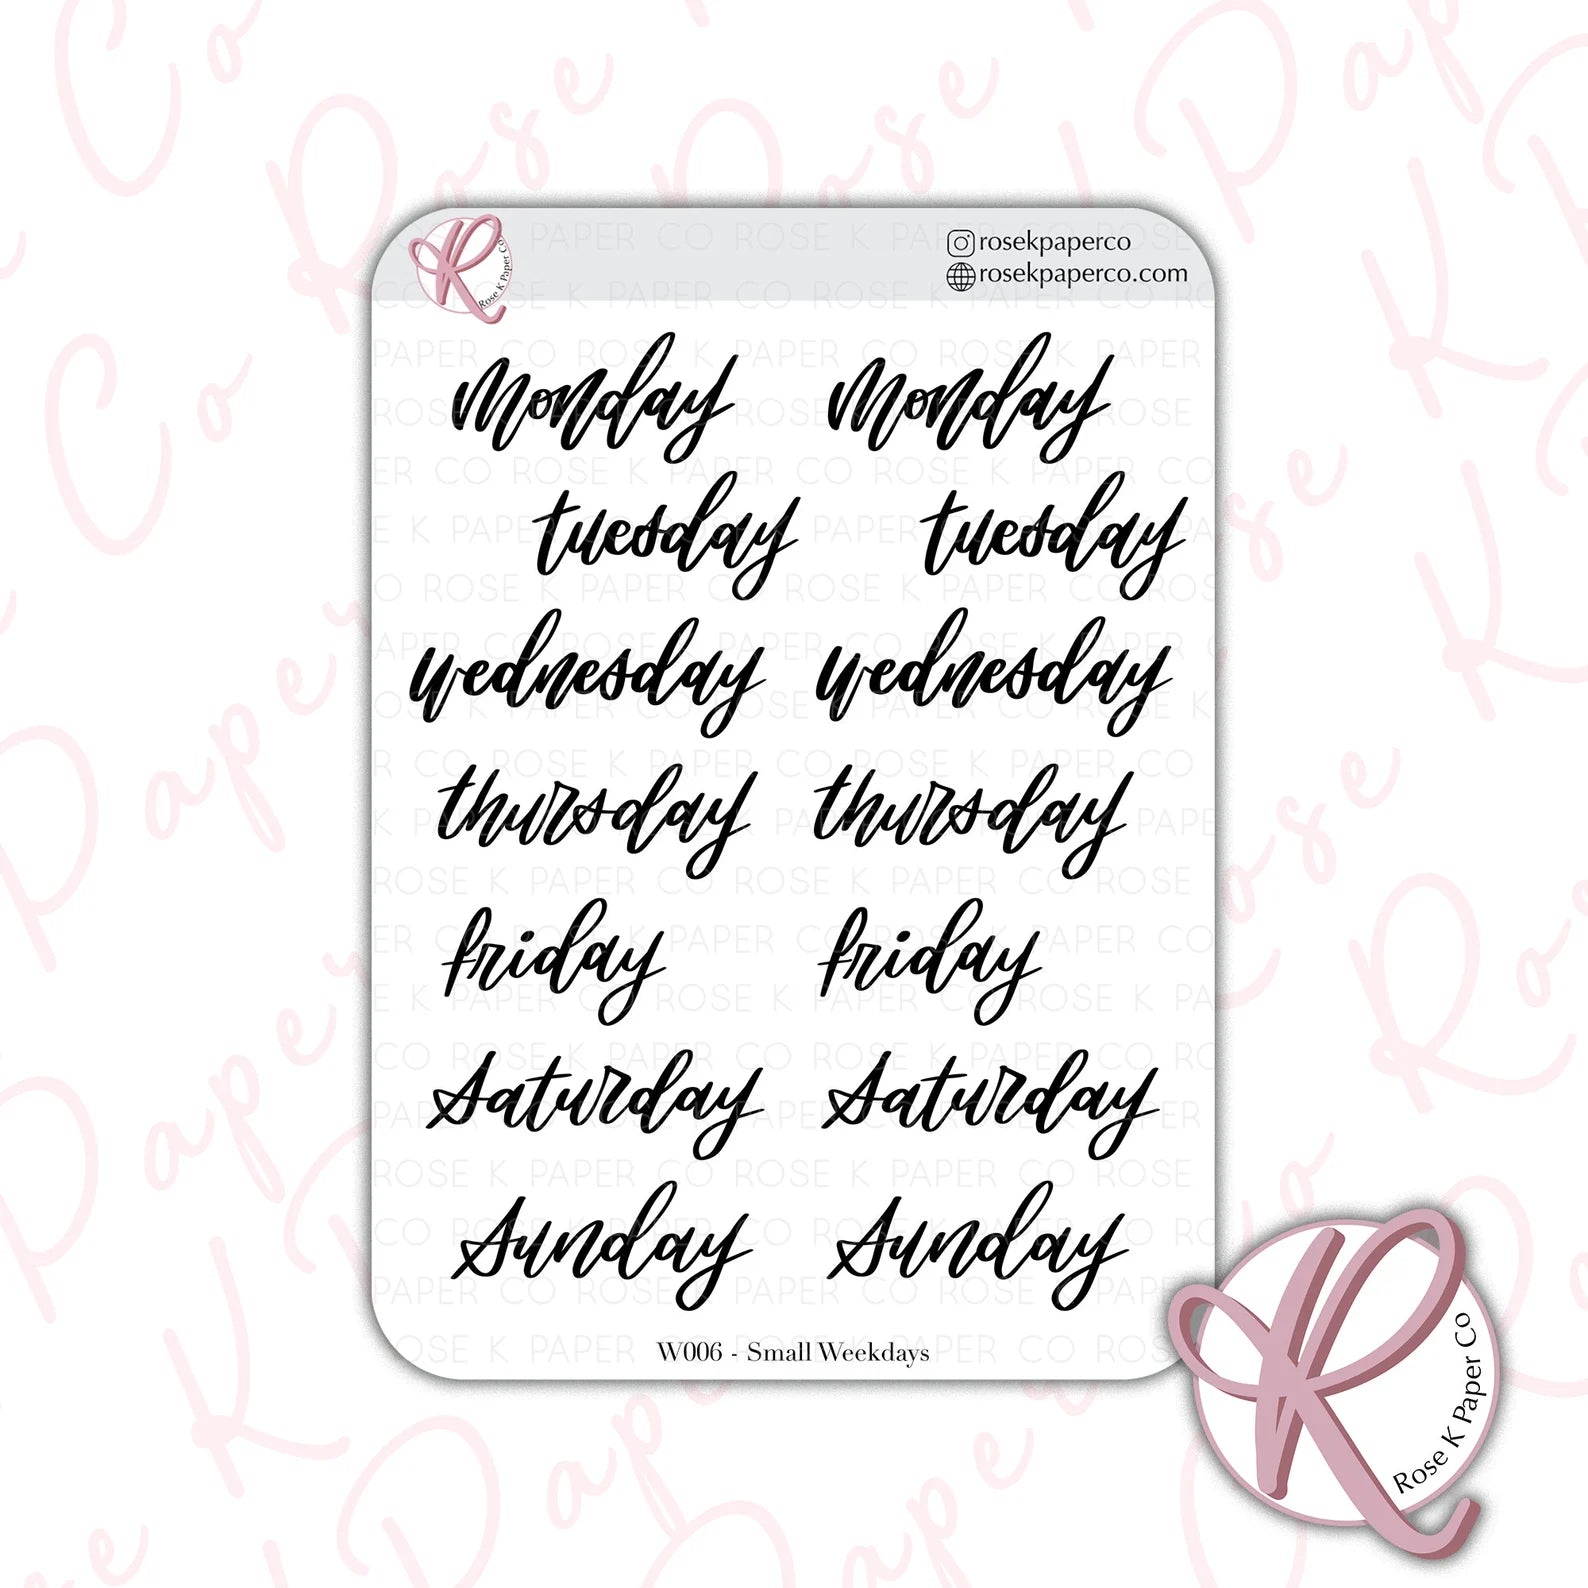 Rose K Paper Co Planner Stickers | Fancy Hand-lettered Days Of The Week